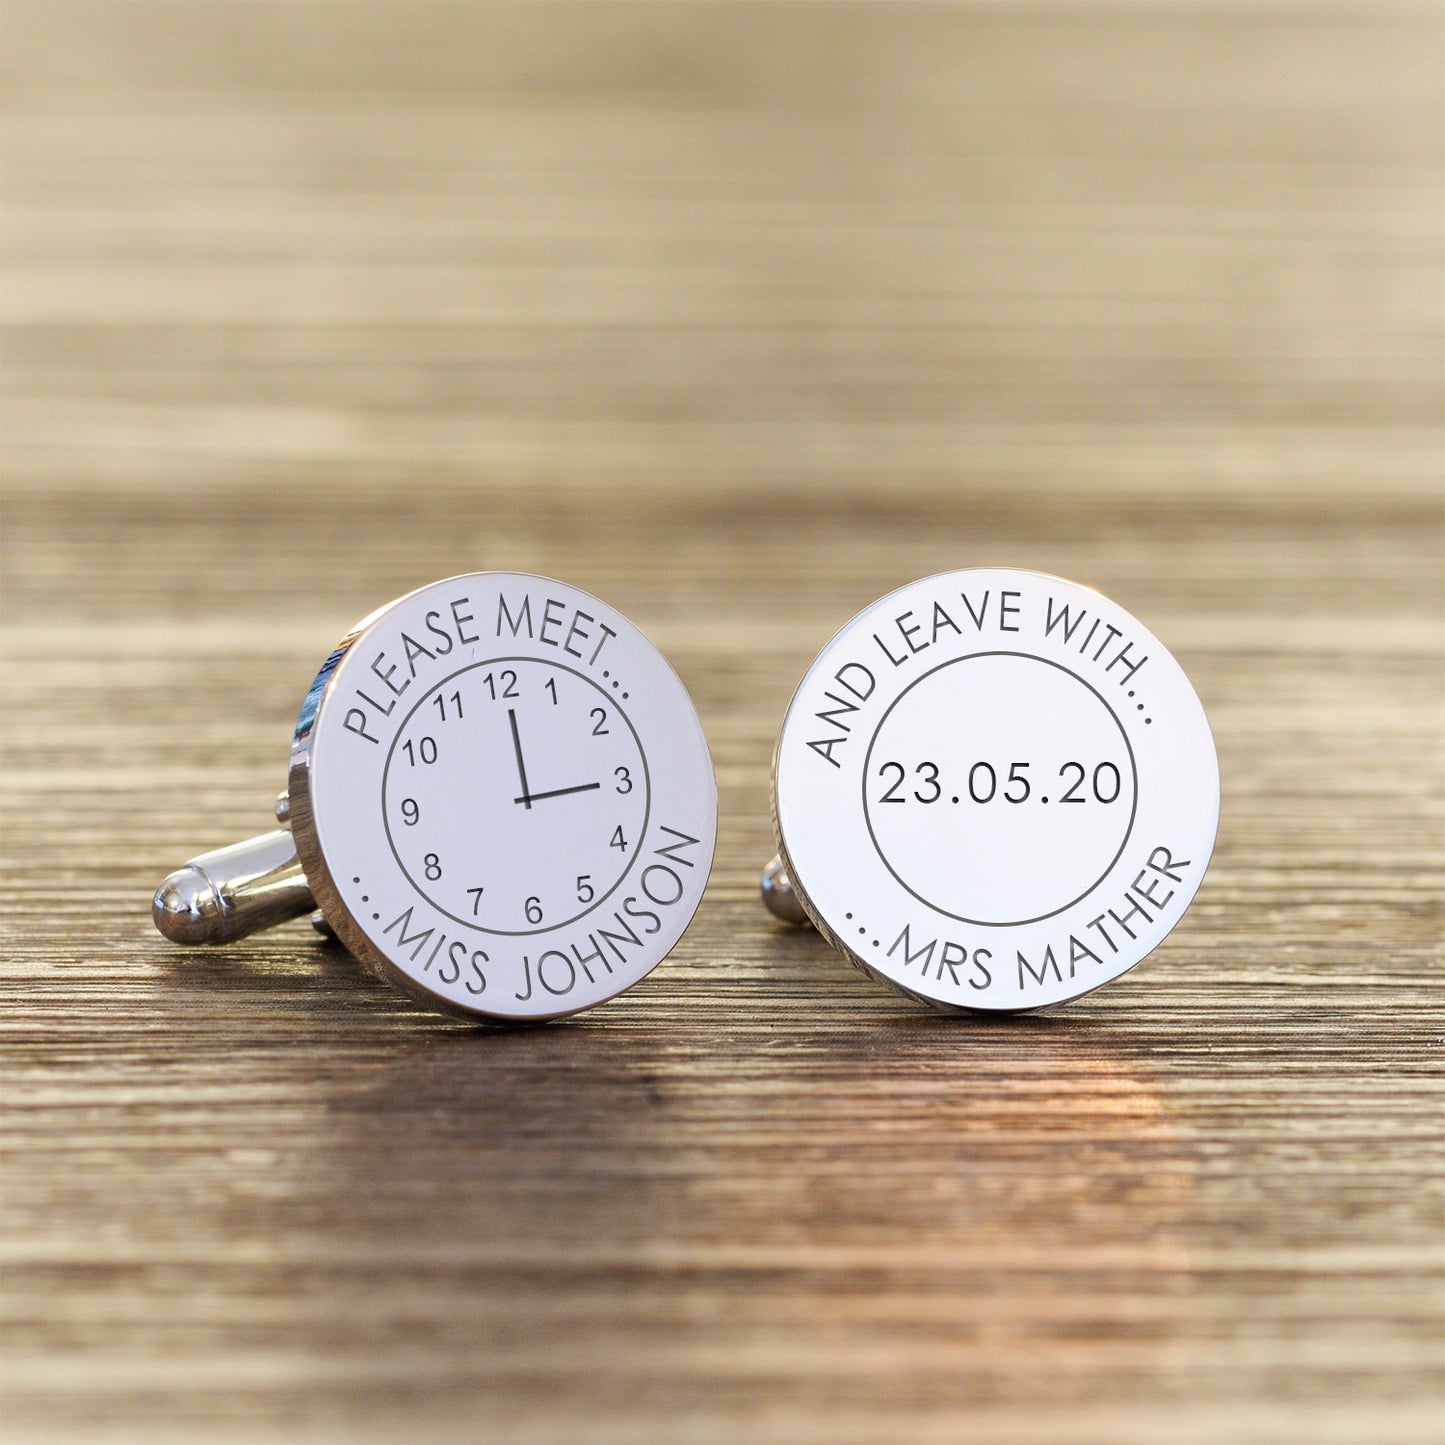 Fun cufflinks for the groom. Circular silver finish cufflinks which carry the date of your wedding and the time on a clock face. The message on the first cufflink reads "please meet Ms ..." and the second cufflink reads "and leave with Mrs..."